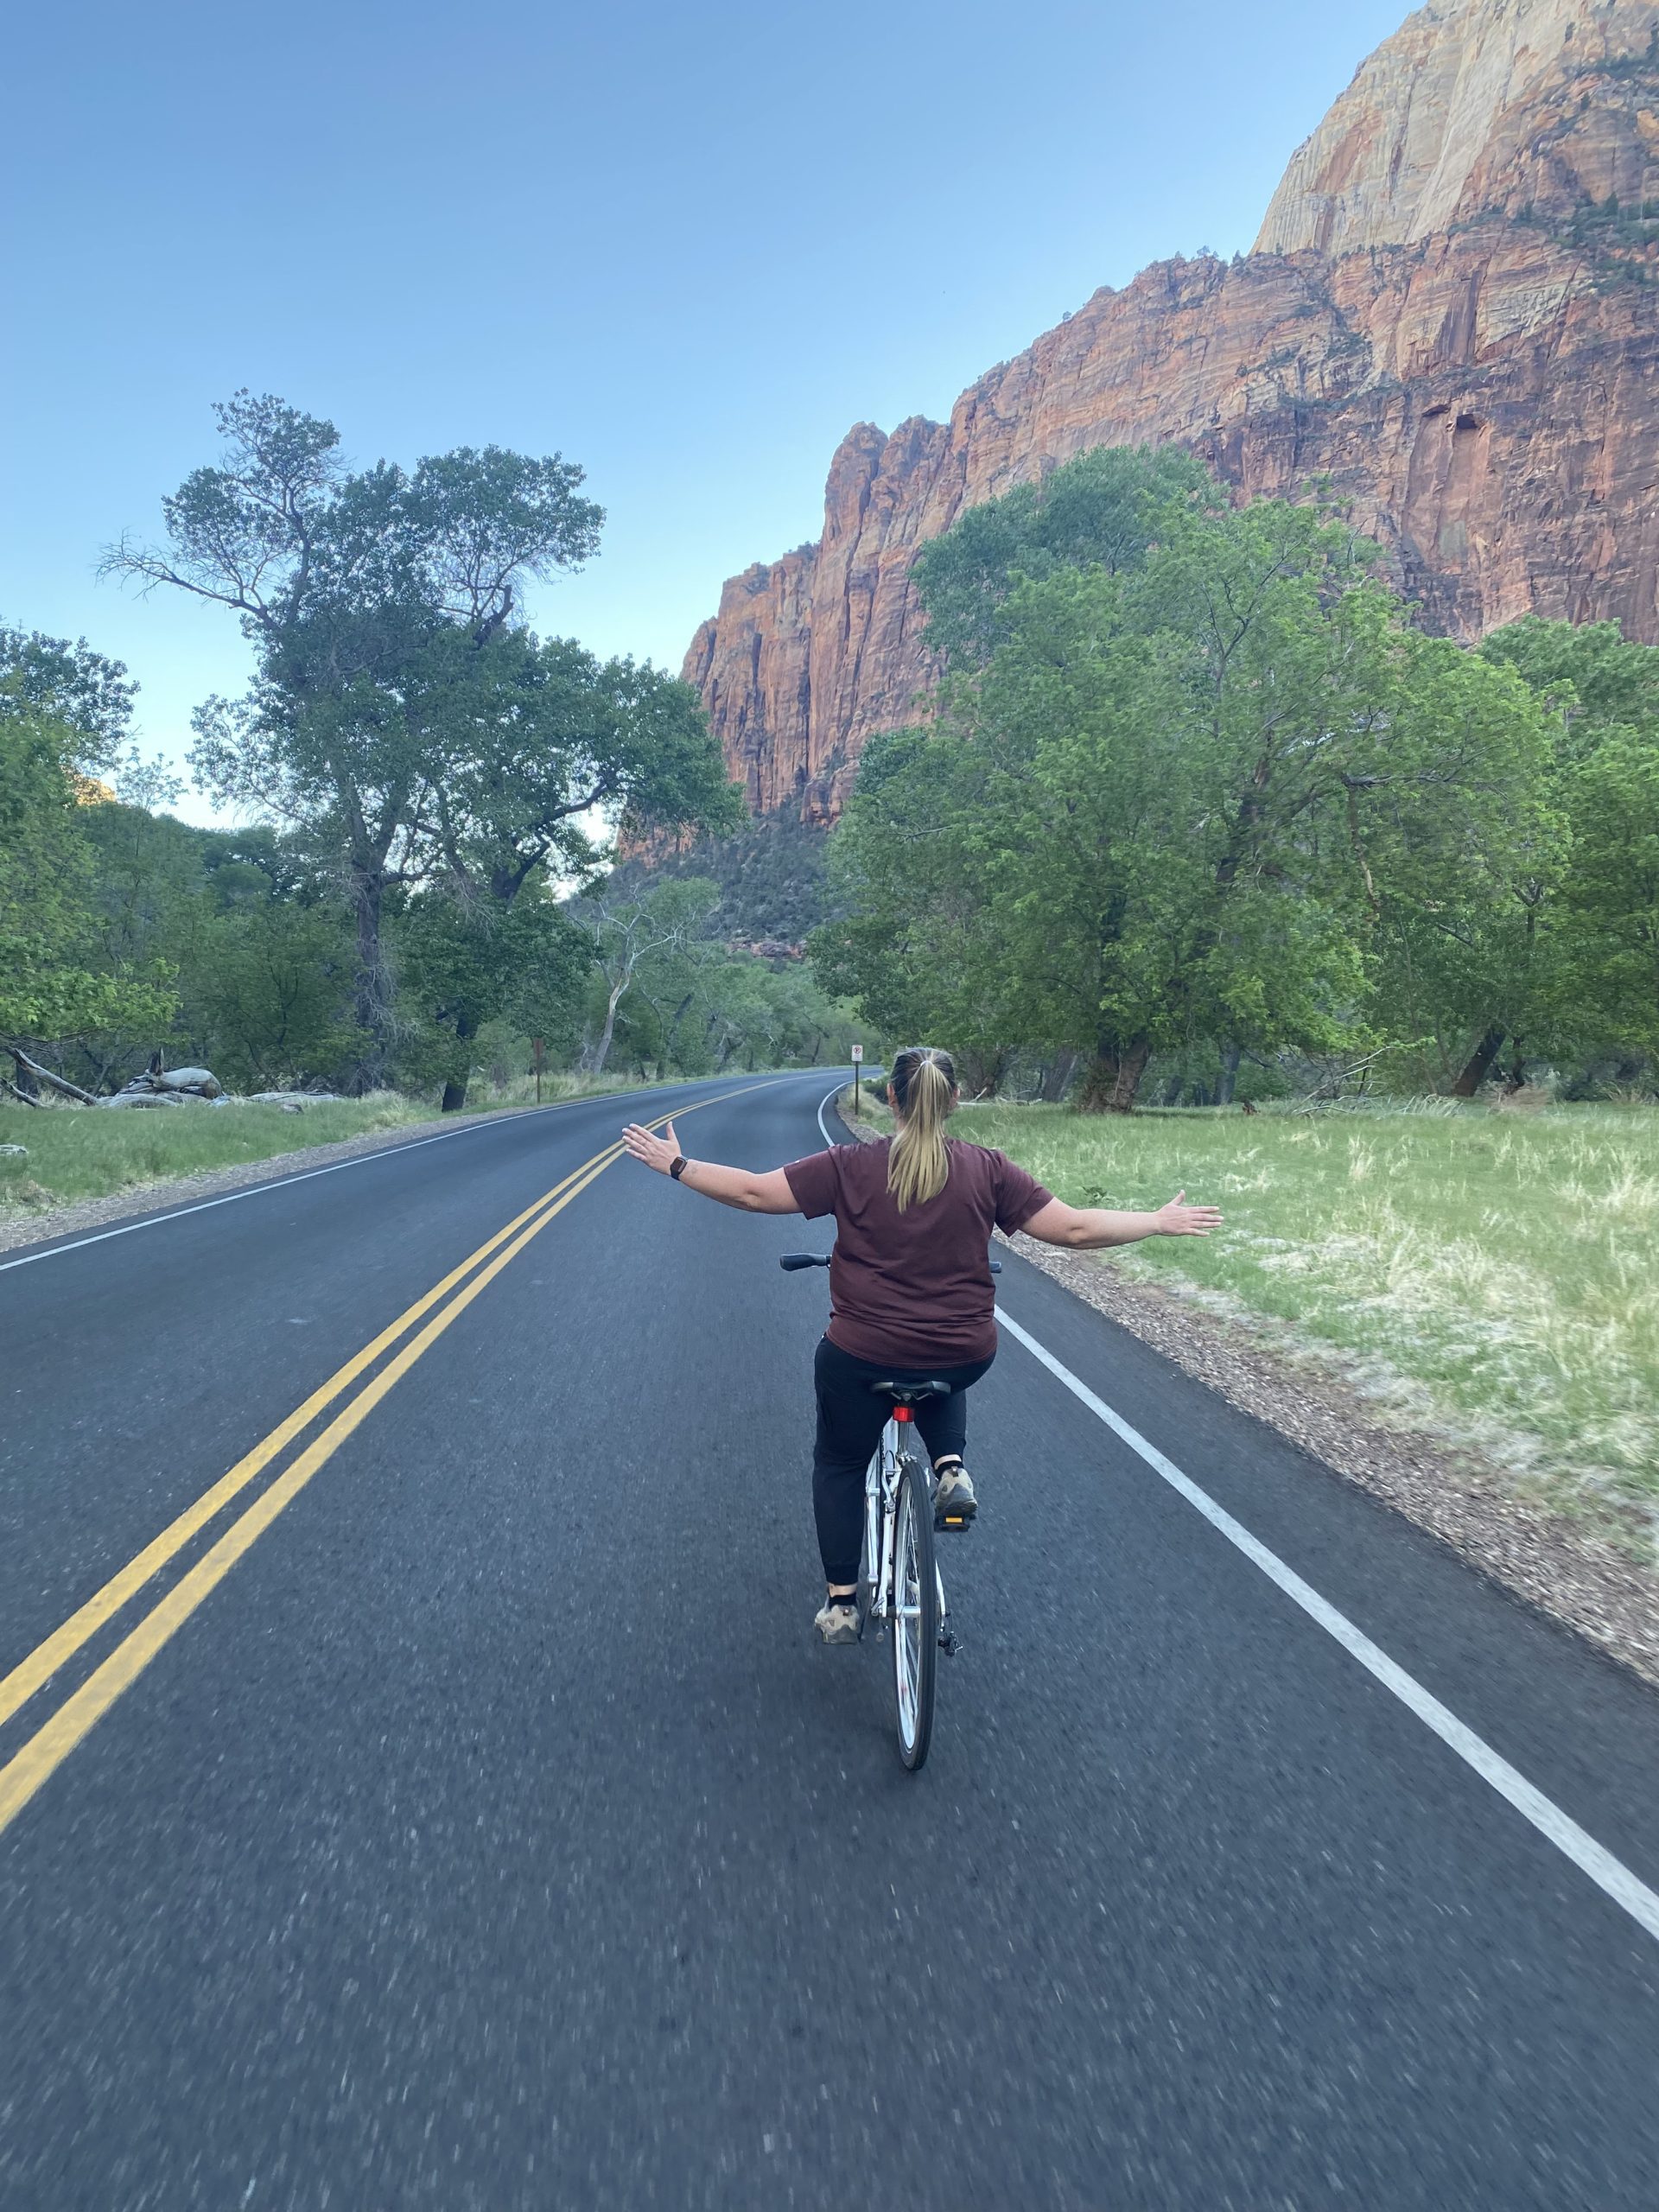 a woman riding a bicycle on a road with trees and mountains